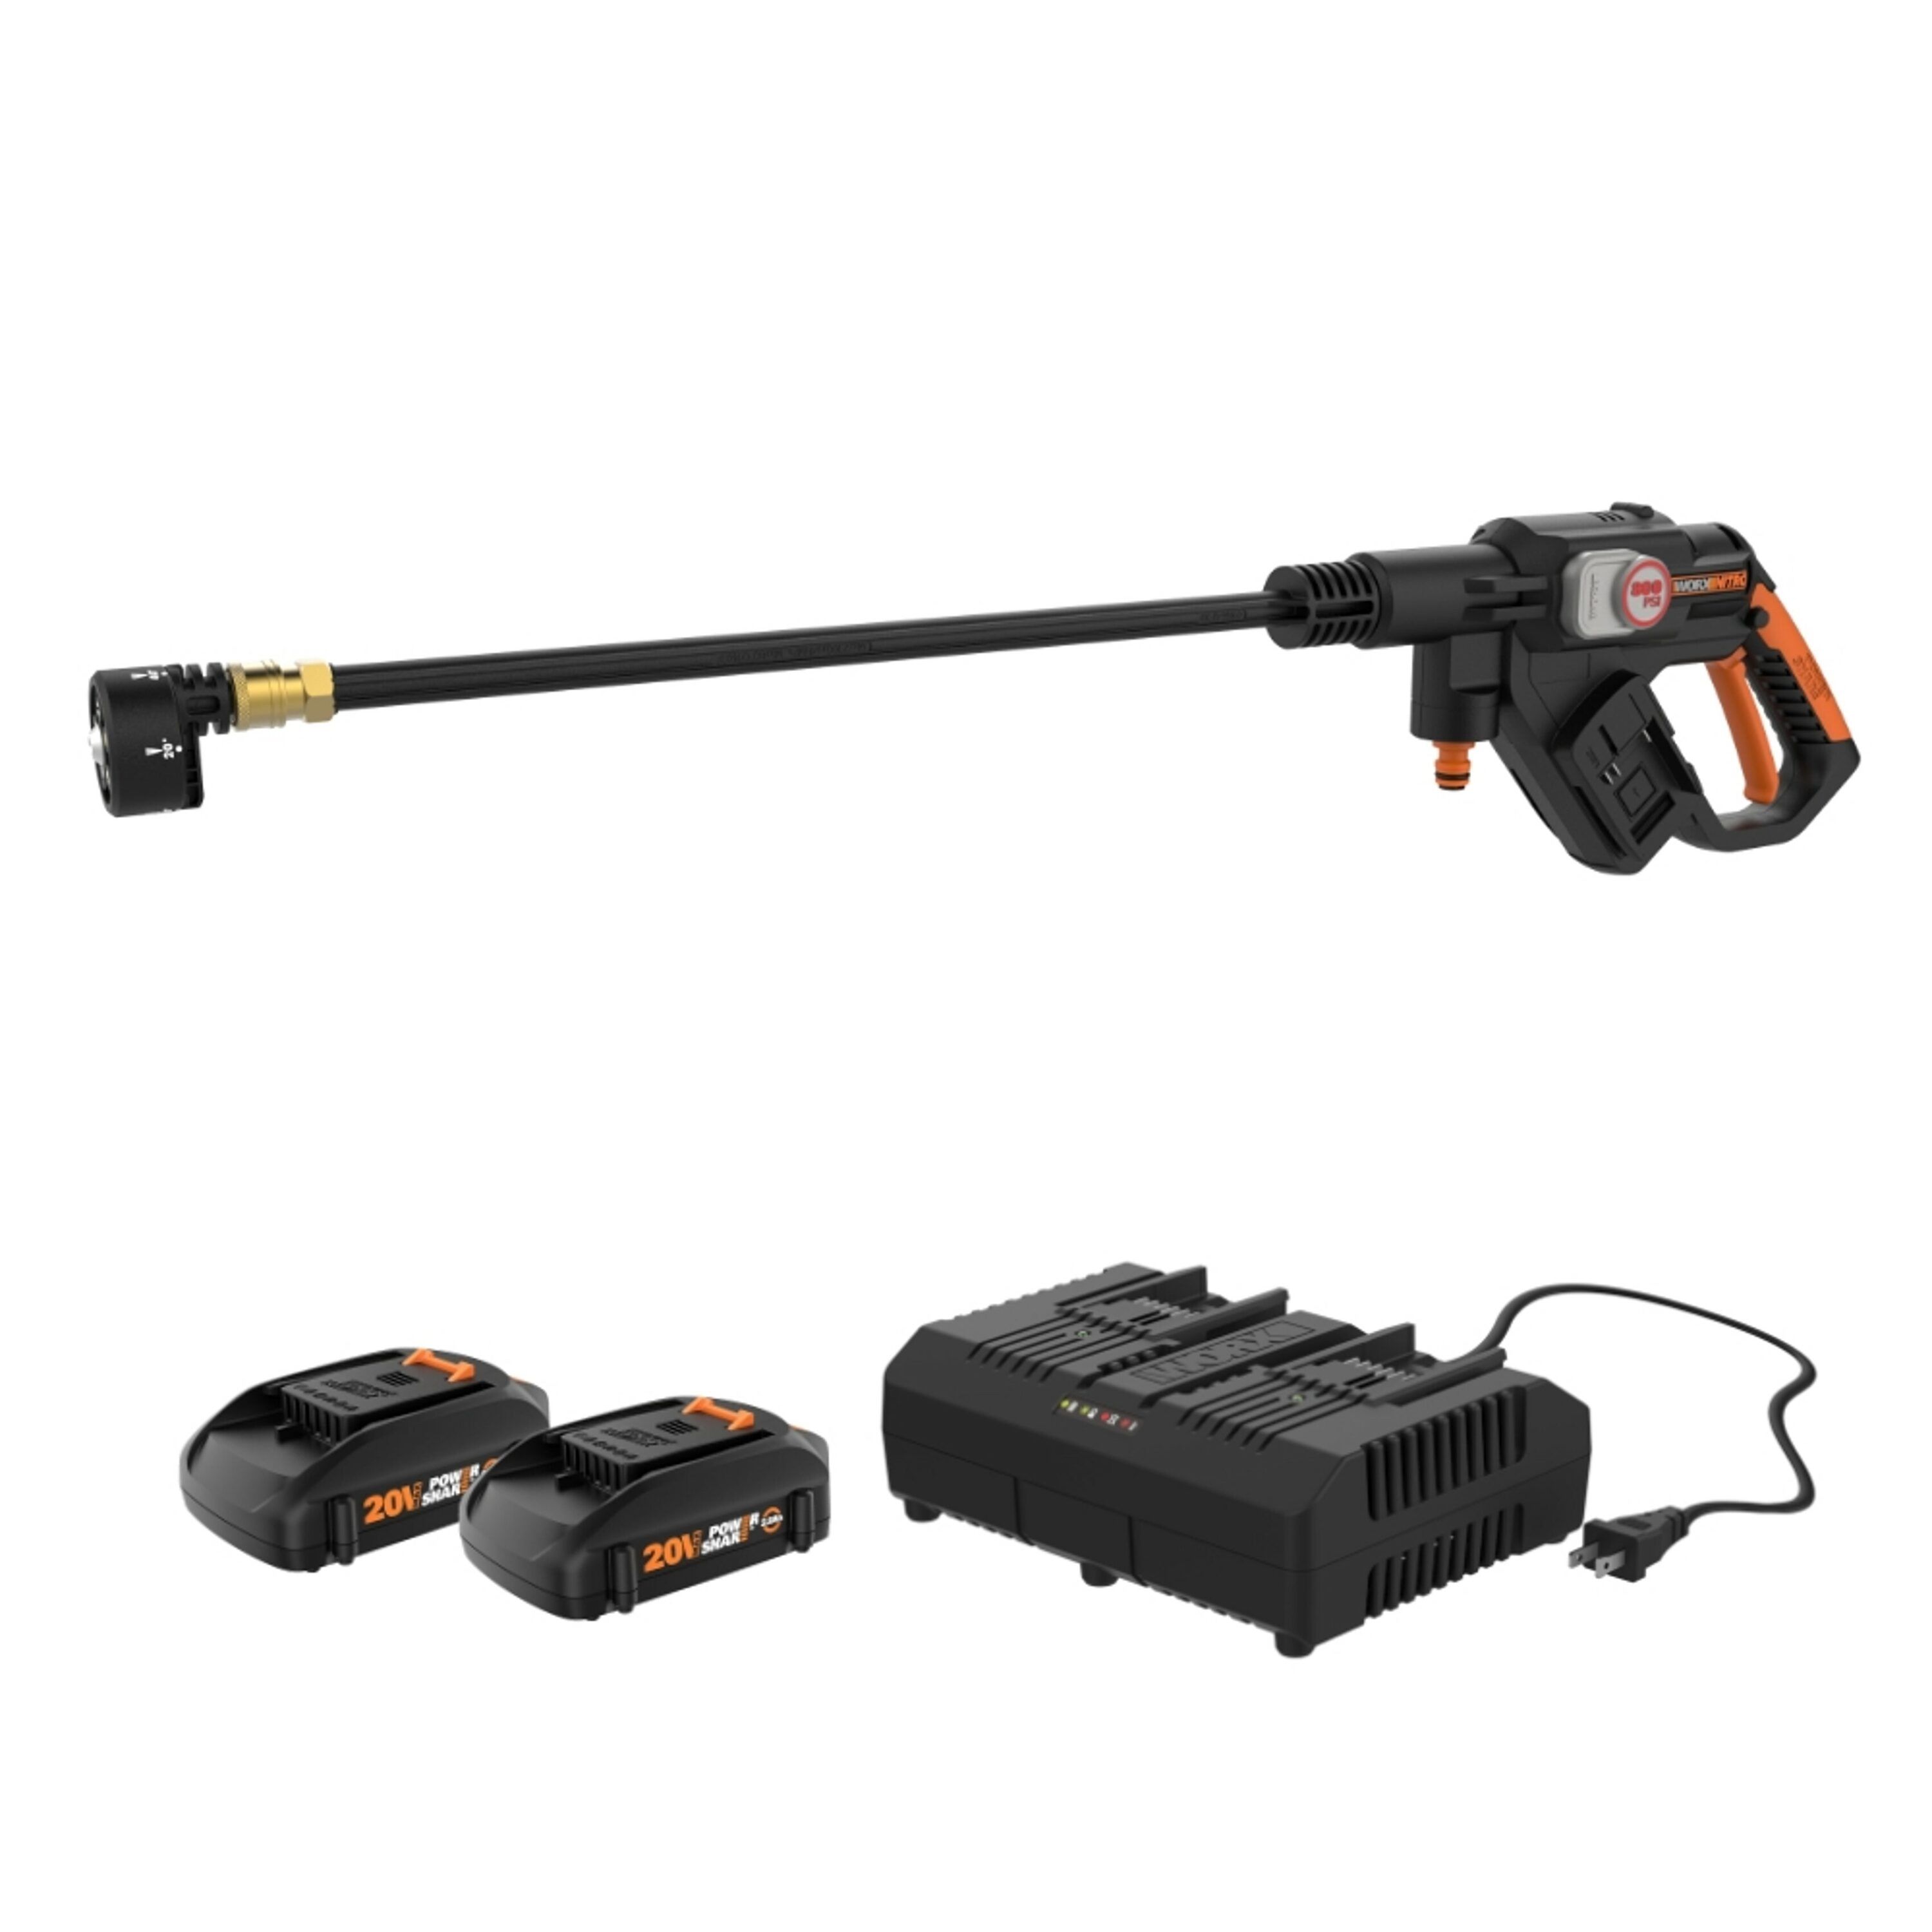 How To Assemble Black+Decker Cordless Pressure Washer 